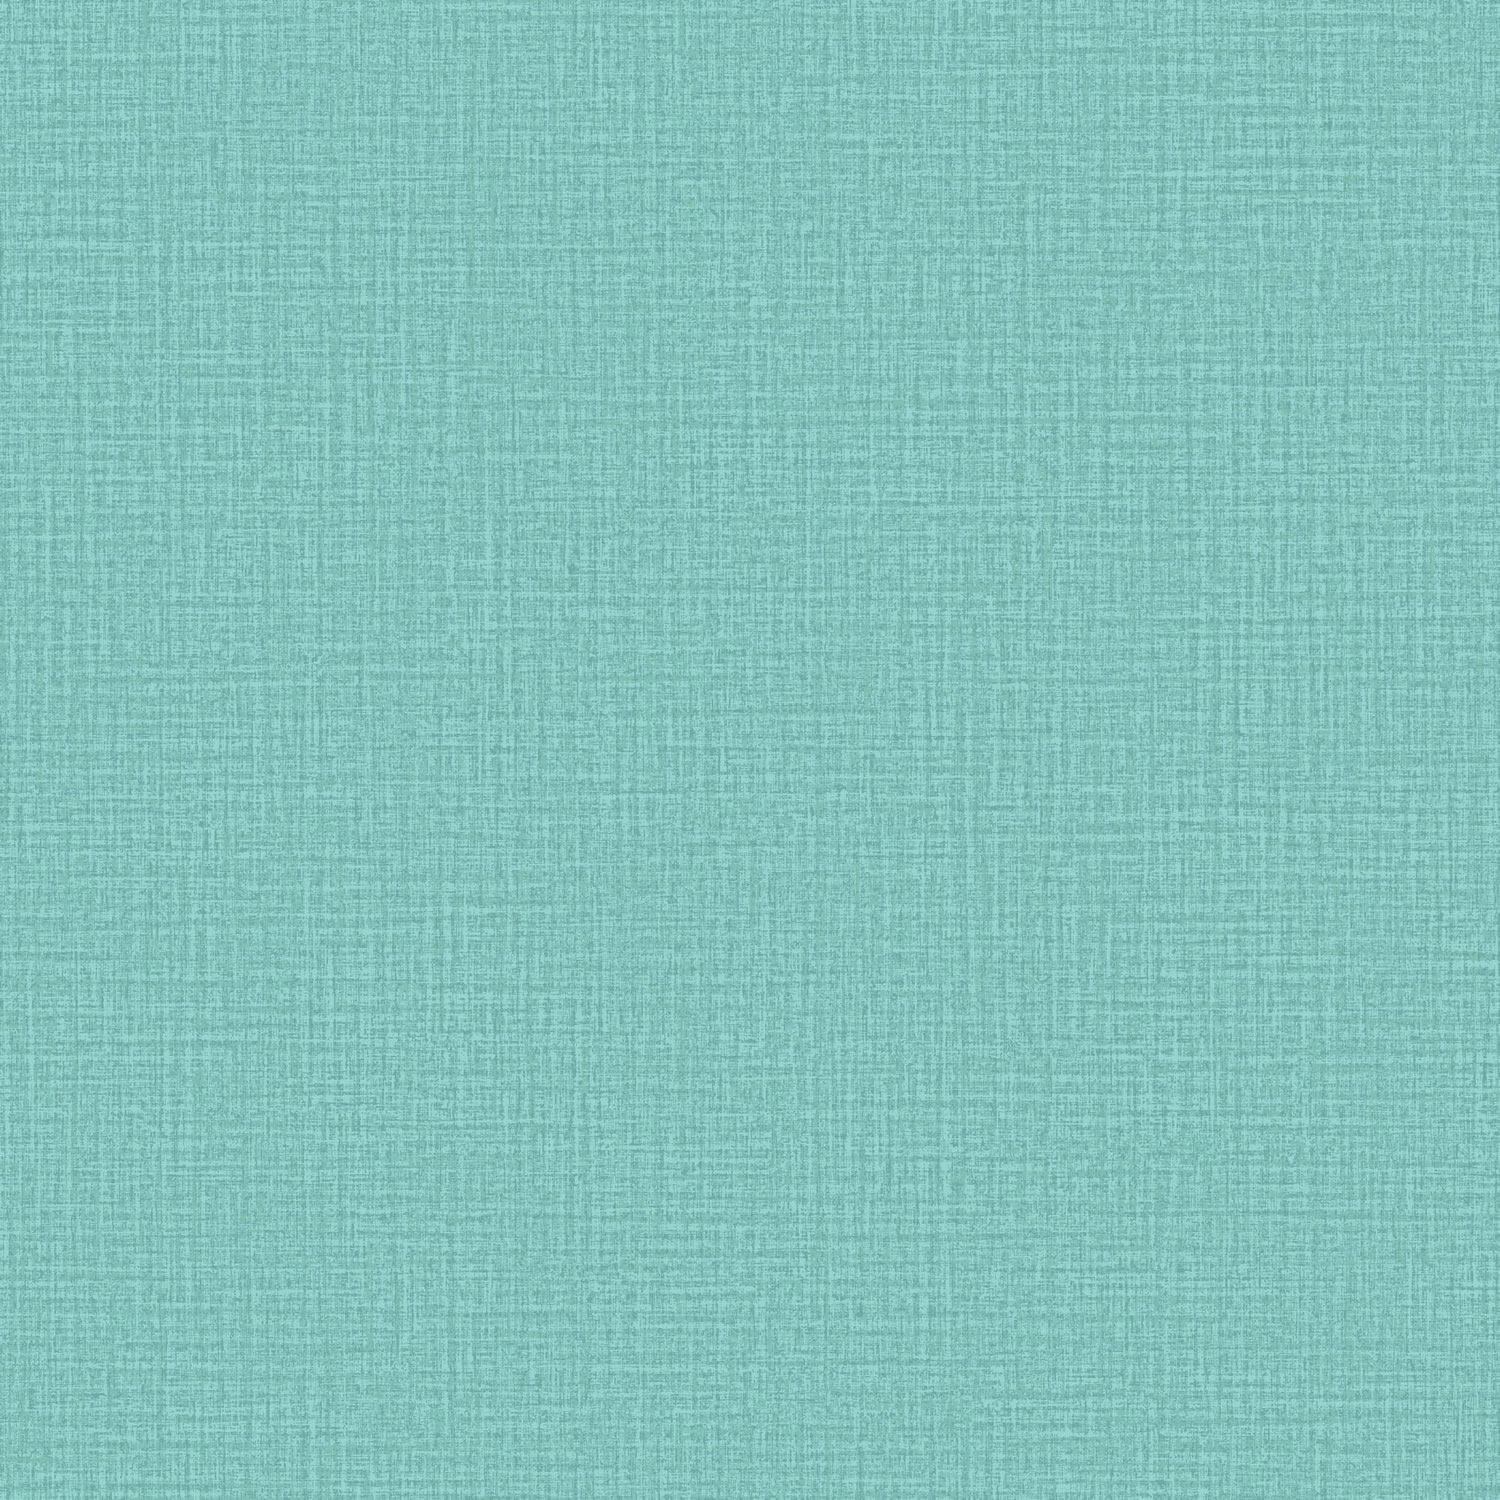 Grandeco Boho Chic Plain Teal Wallpaper 10m Roll Next Day Delivery